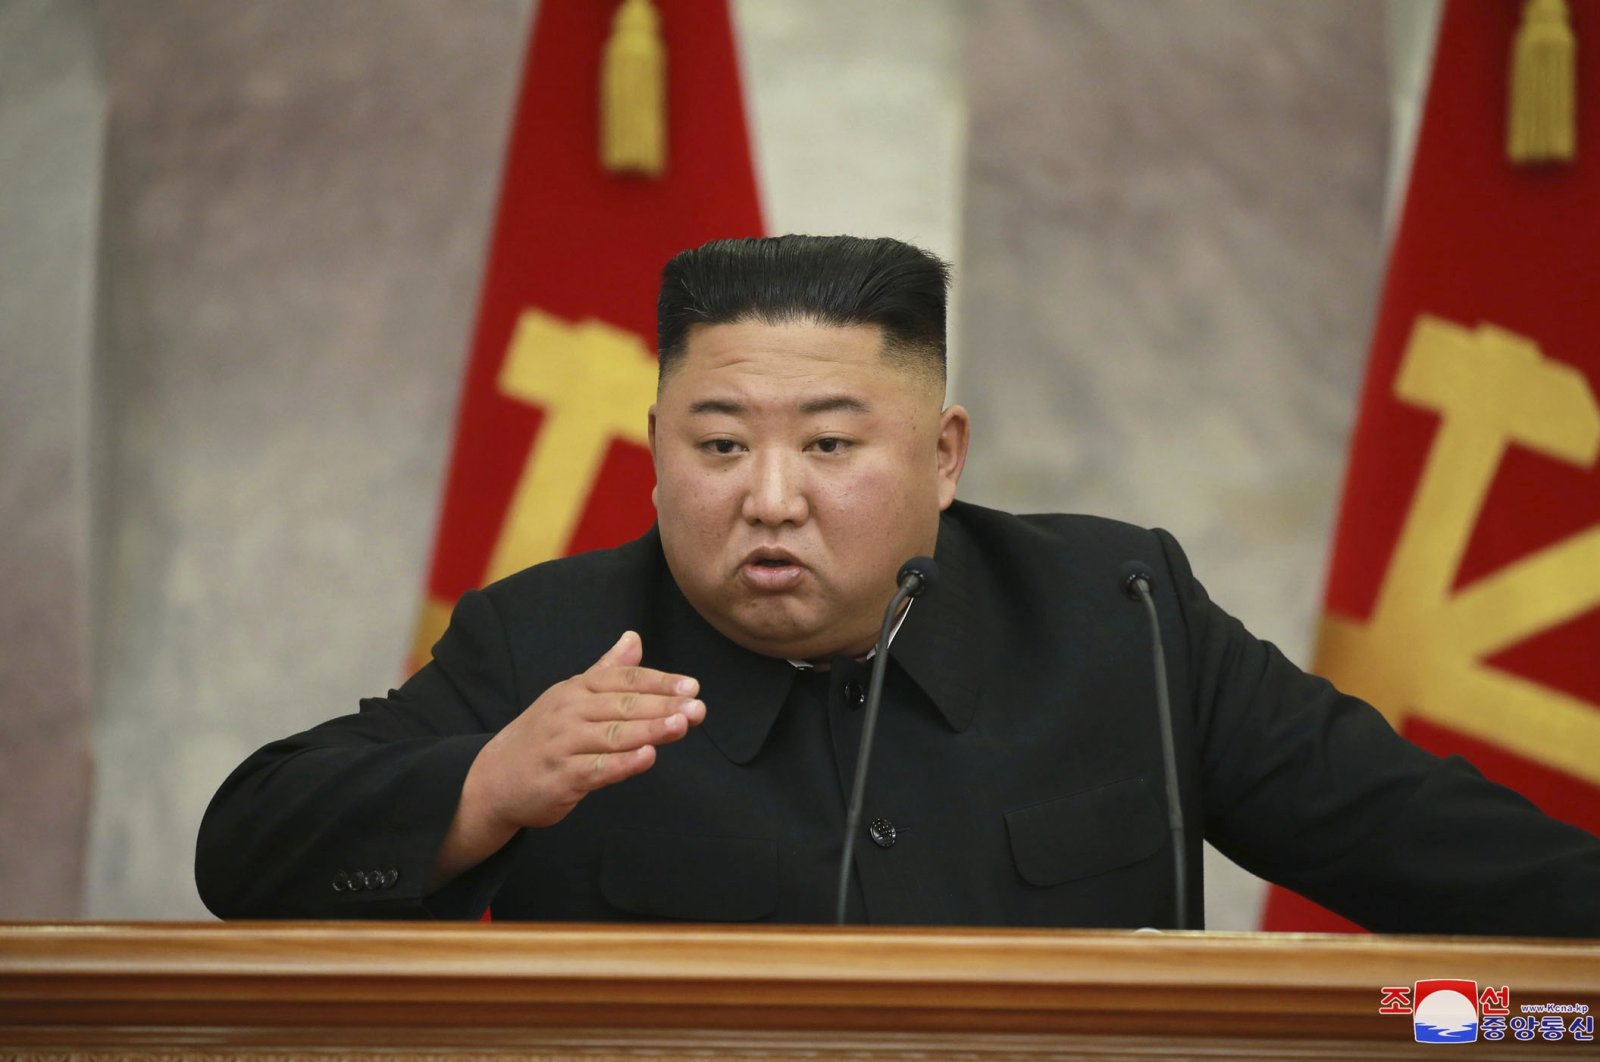 In this photo provided by the North Korean government, North Korean leader Kim Jong Un speaks during an enlarged meeting of the Central Military Commission of the Workers' Party of Korea in Pyongyang, North Korea Saturday, July 18, 2020. (AP Photo)